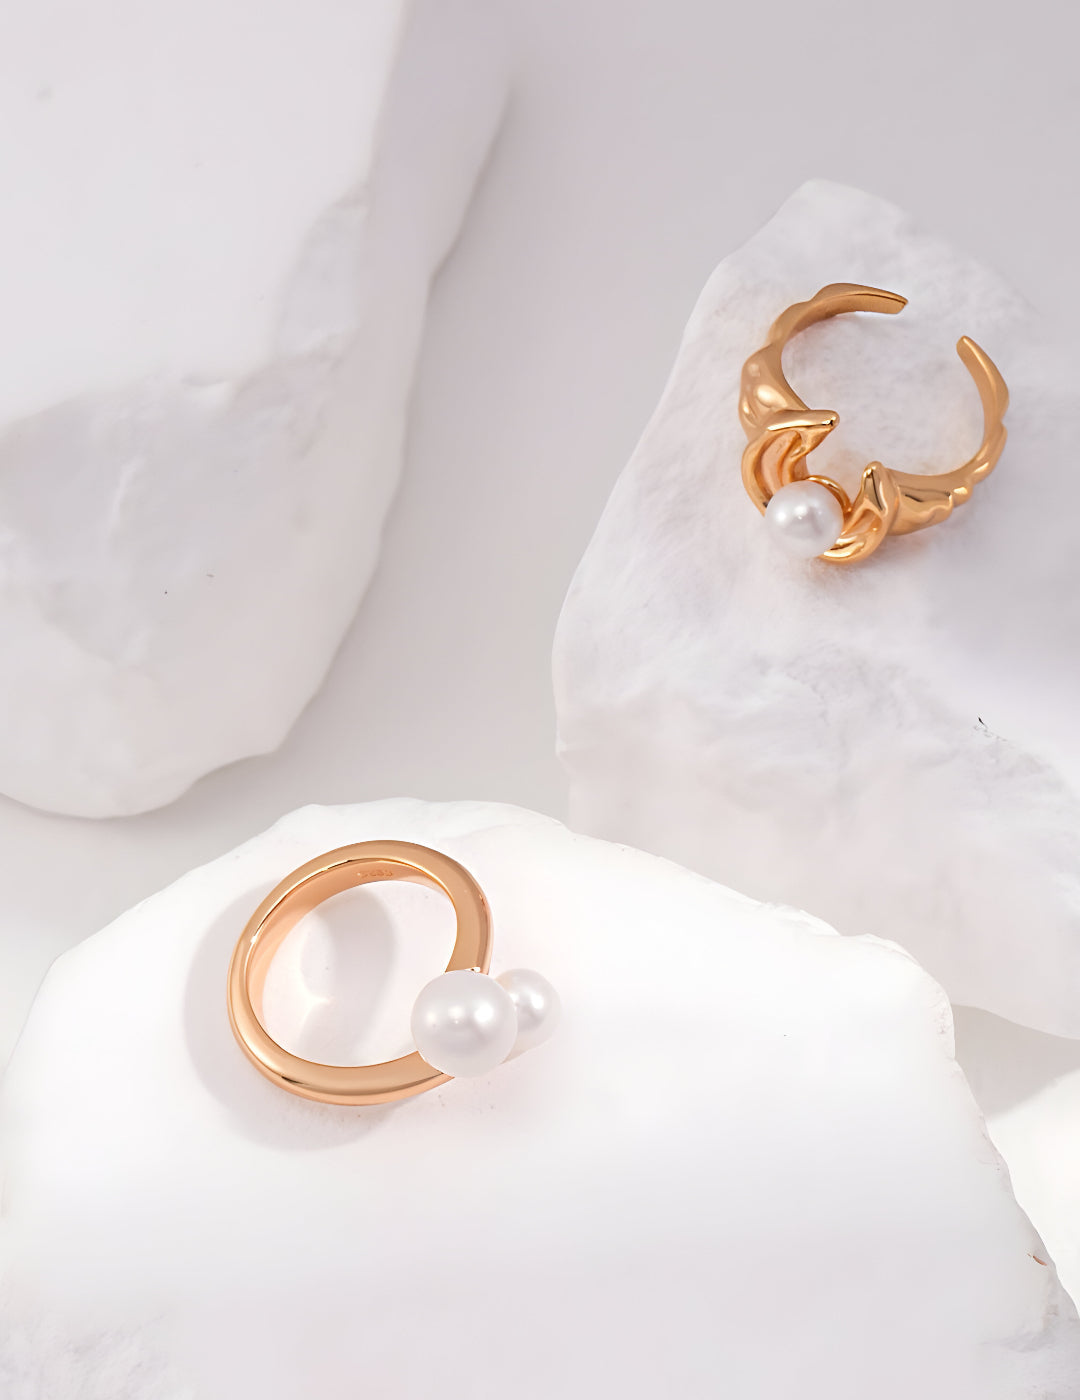 Flowing Stream Pearl Ring - Pearl Luminance Gold Ring - S925 Sterling Silver with 18K Gold Vermeil  Ring - Design captures the subtle and organic flow of a stream